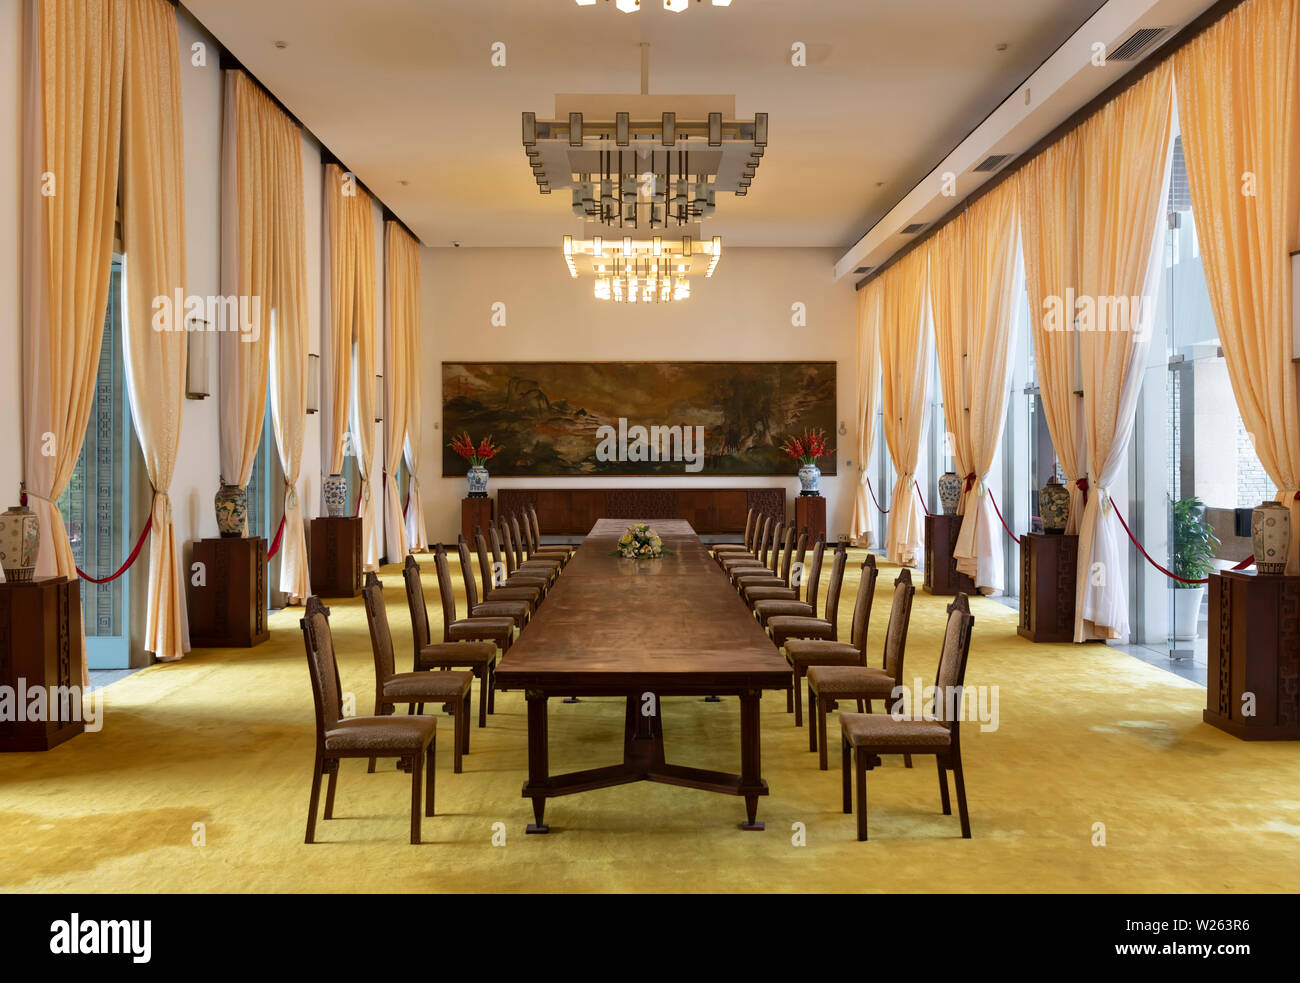 Interior Dining Room Reunification Palace in Ho Chi Minh City, Saigon, A sbuilding by architect Hgo Viet Thu Stock Photo